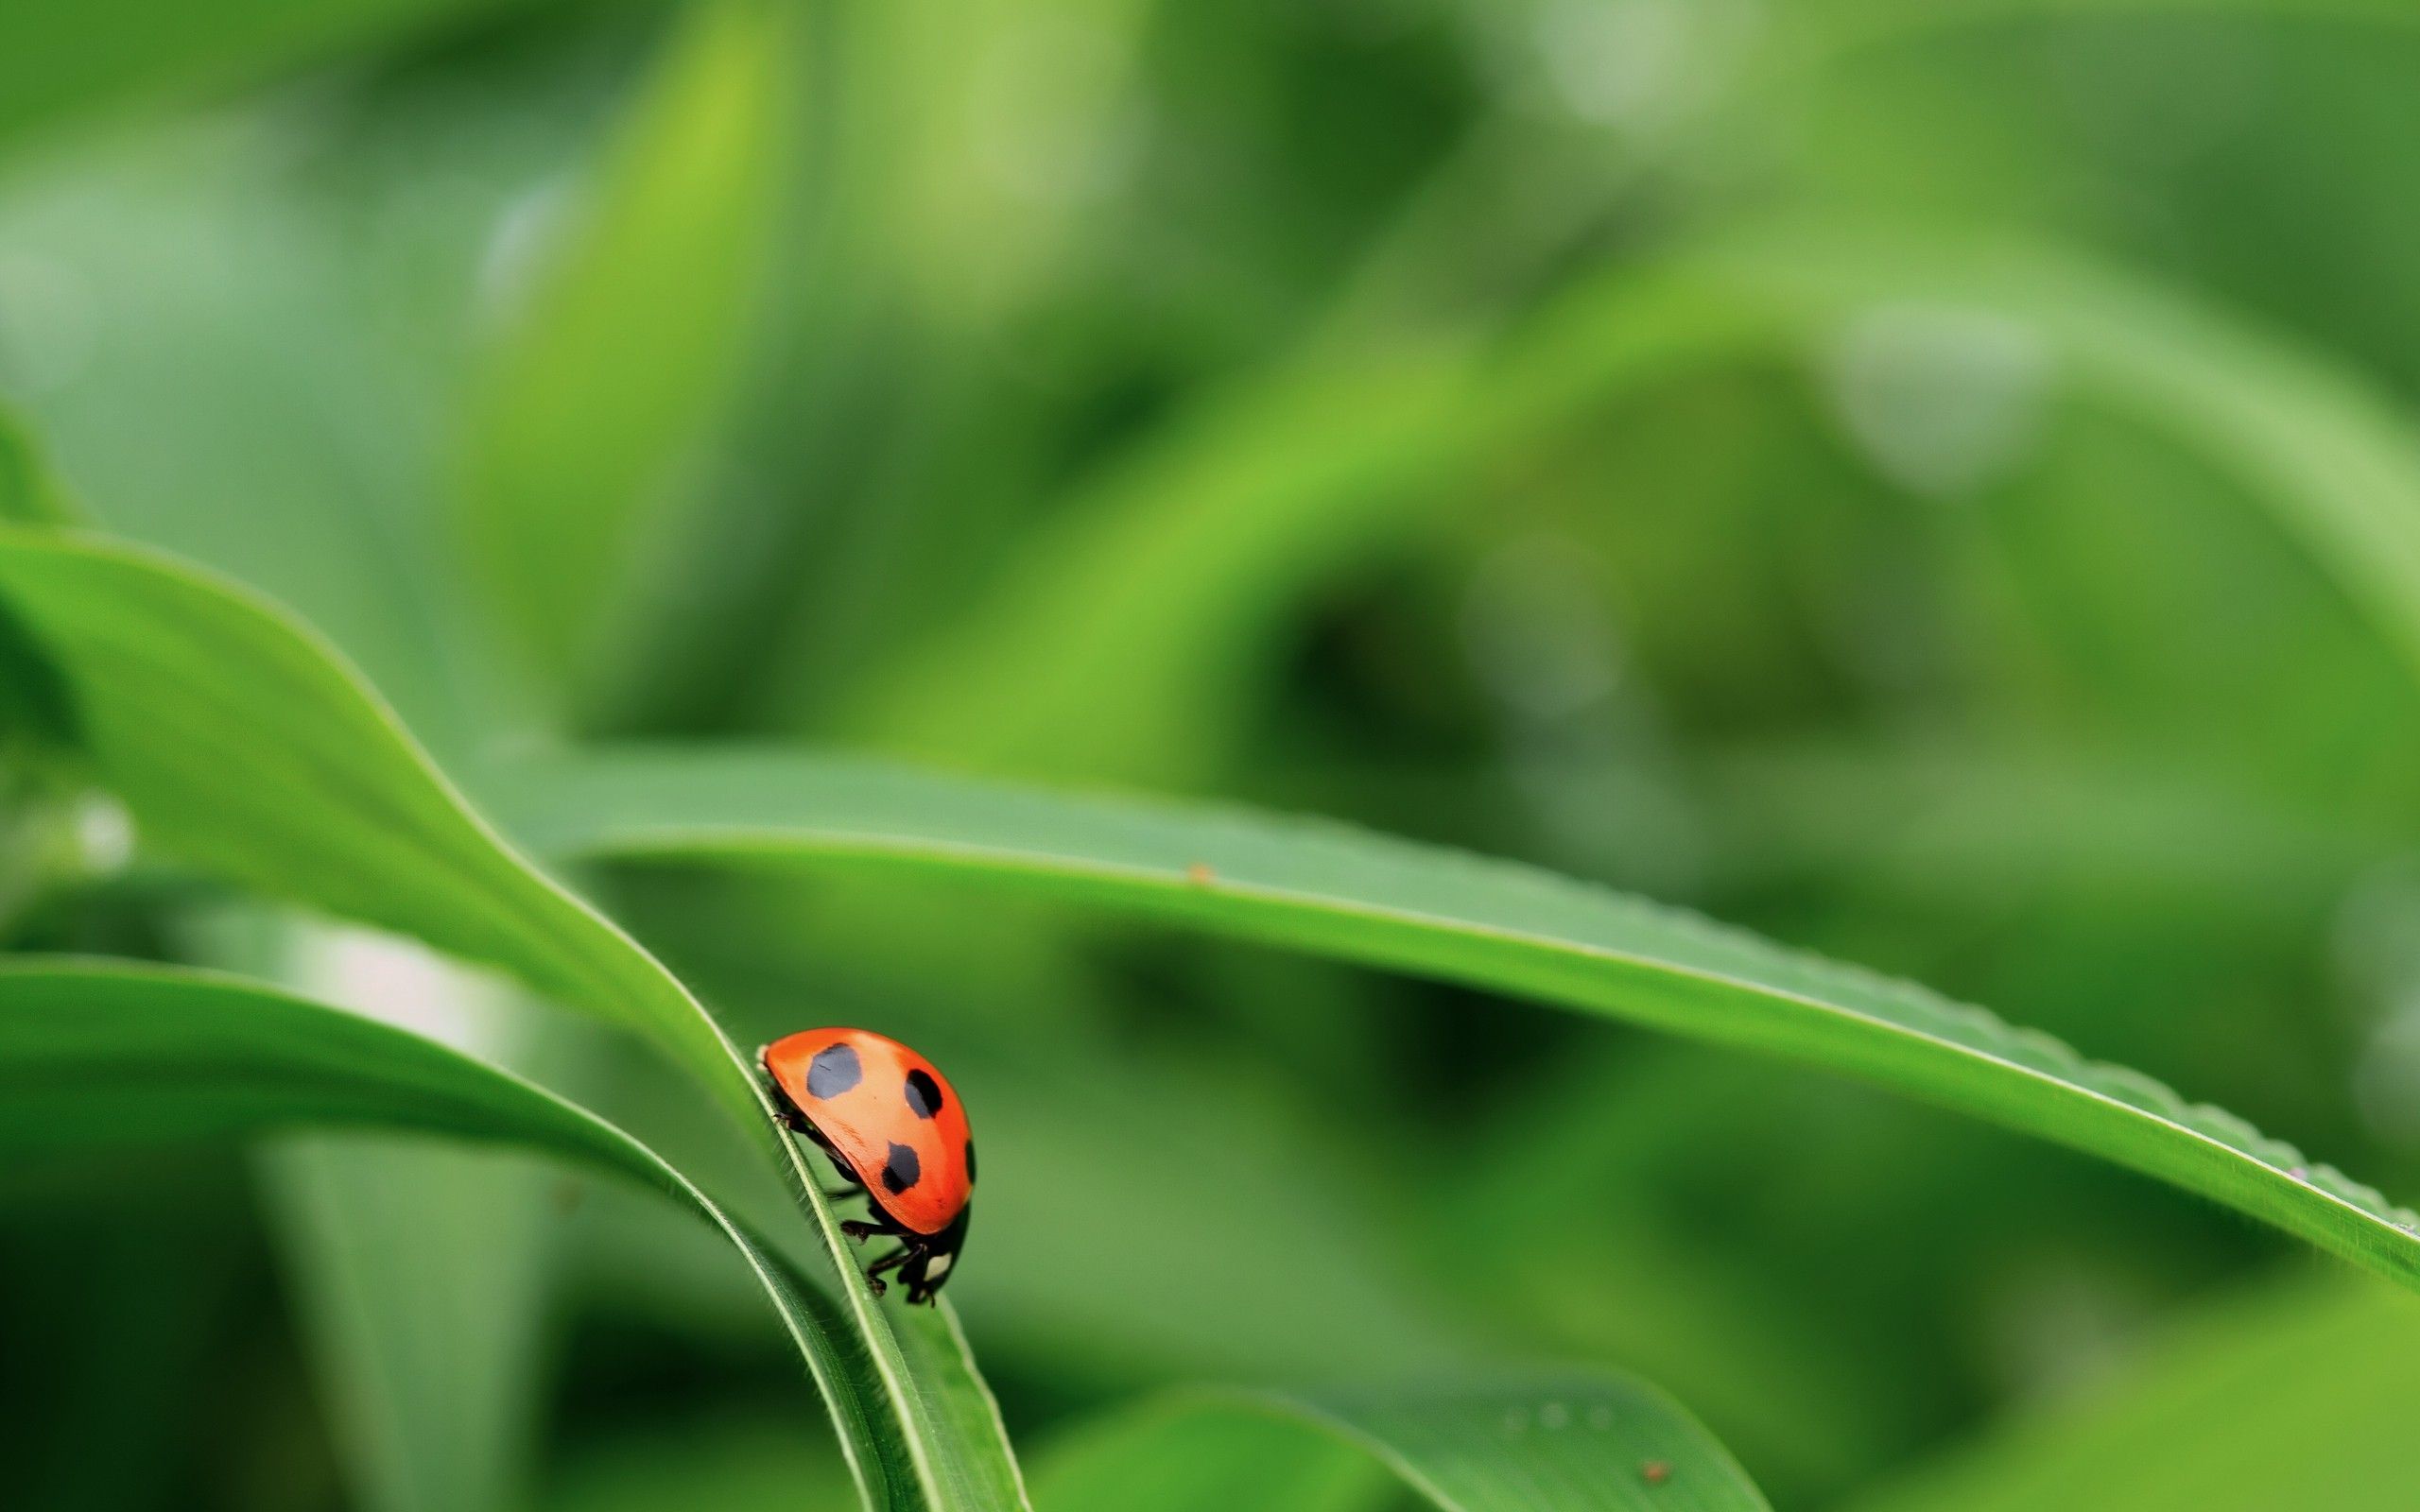 Nature Macro Photo for Wallpaper with Ladybug. Nature wallpaper